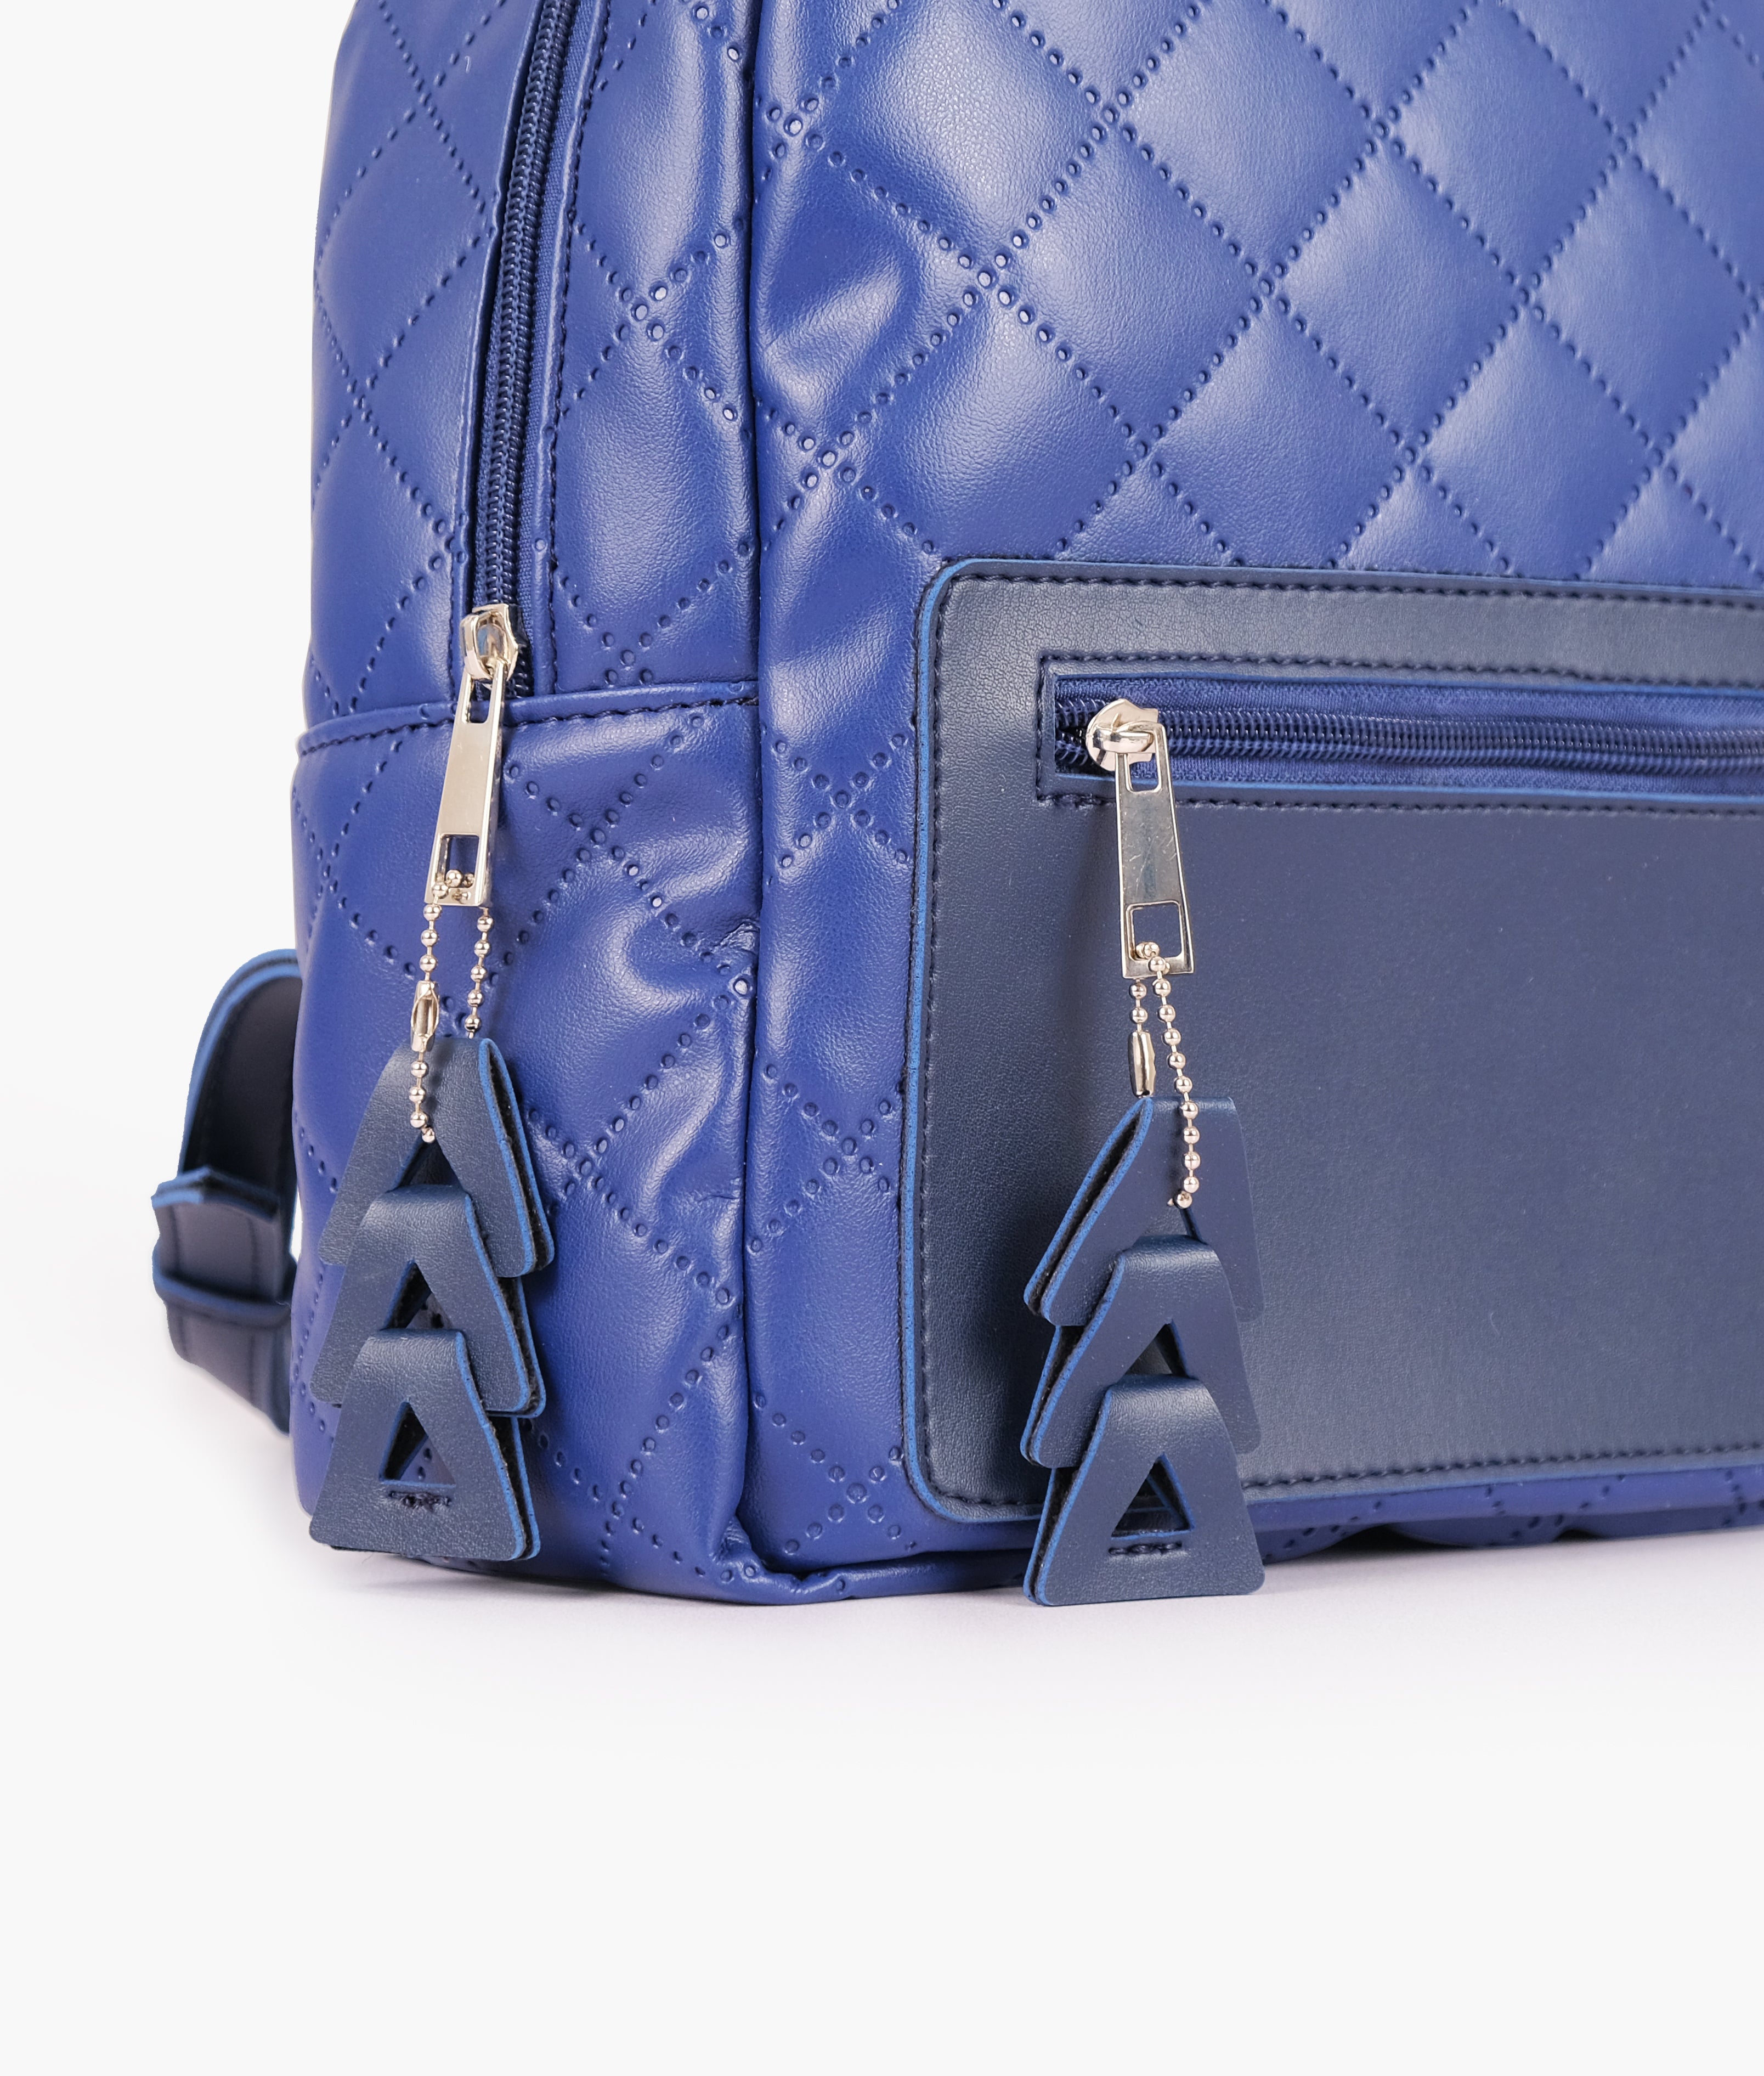 Blue quilted mini backpack